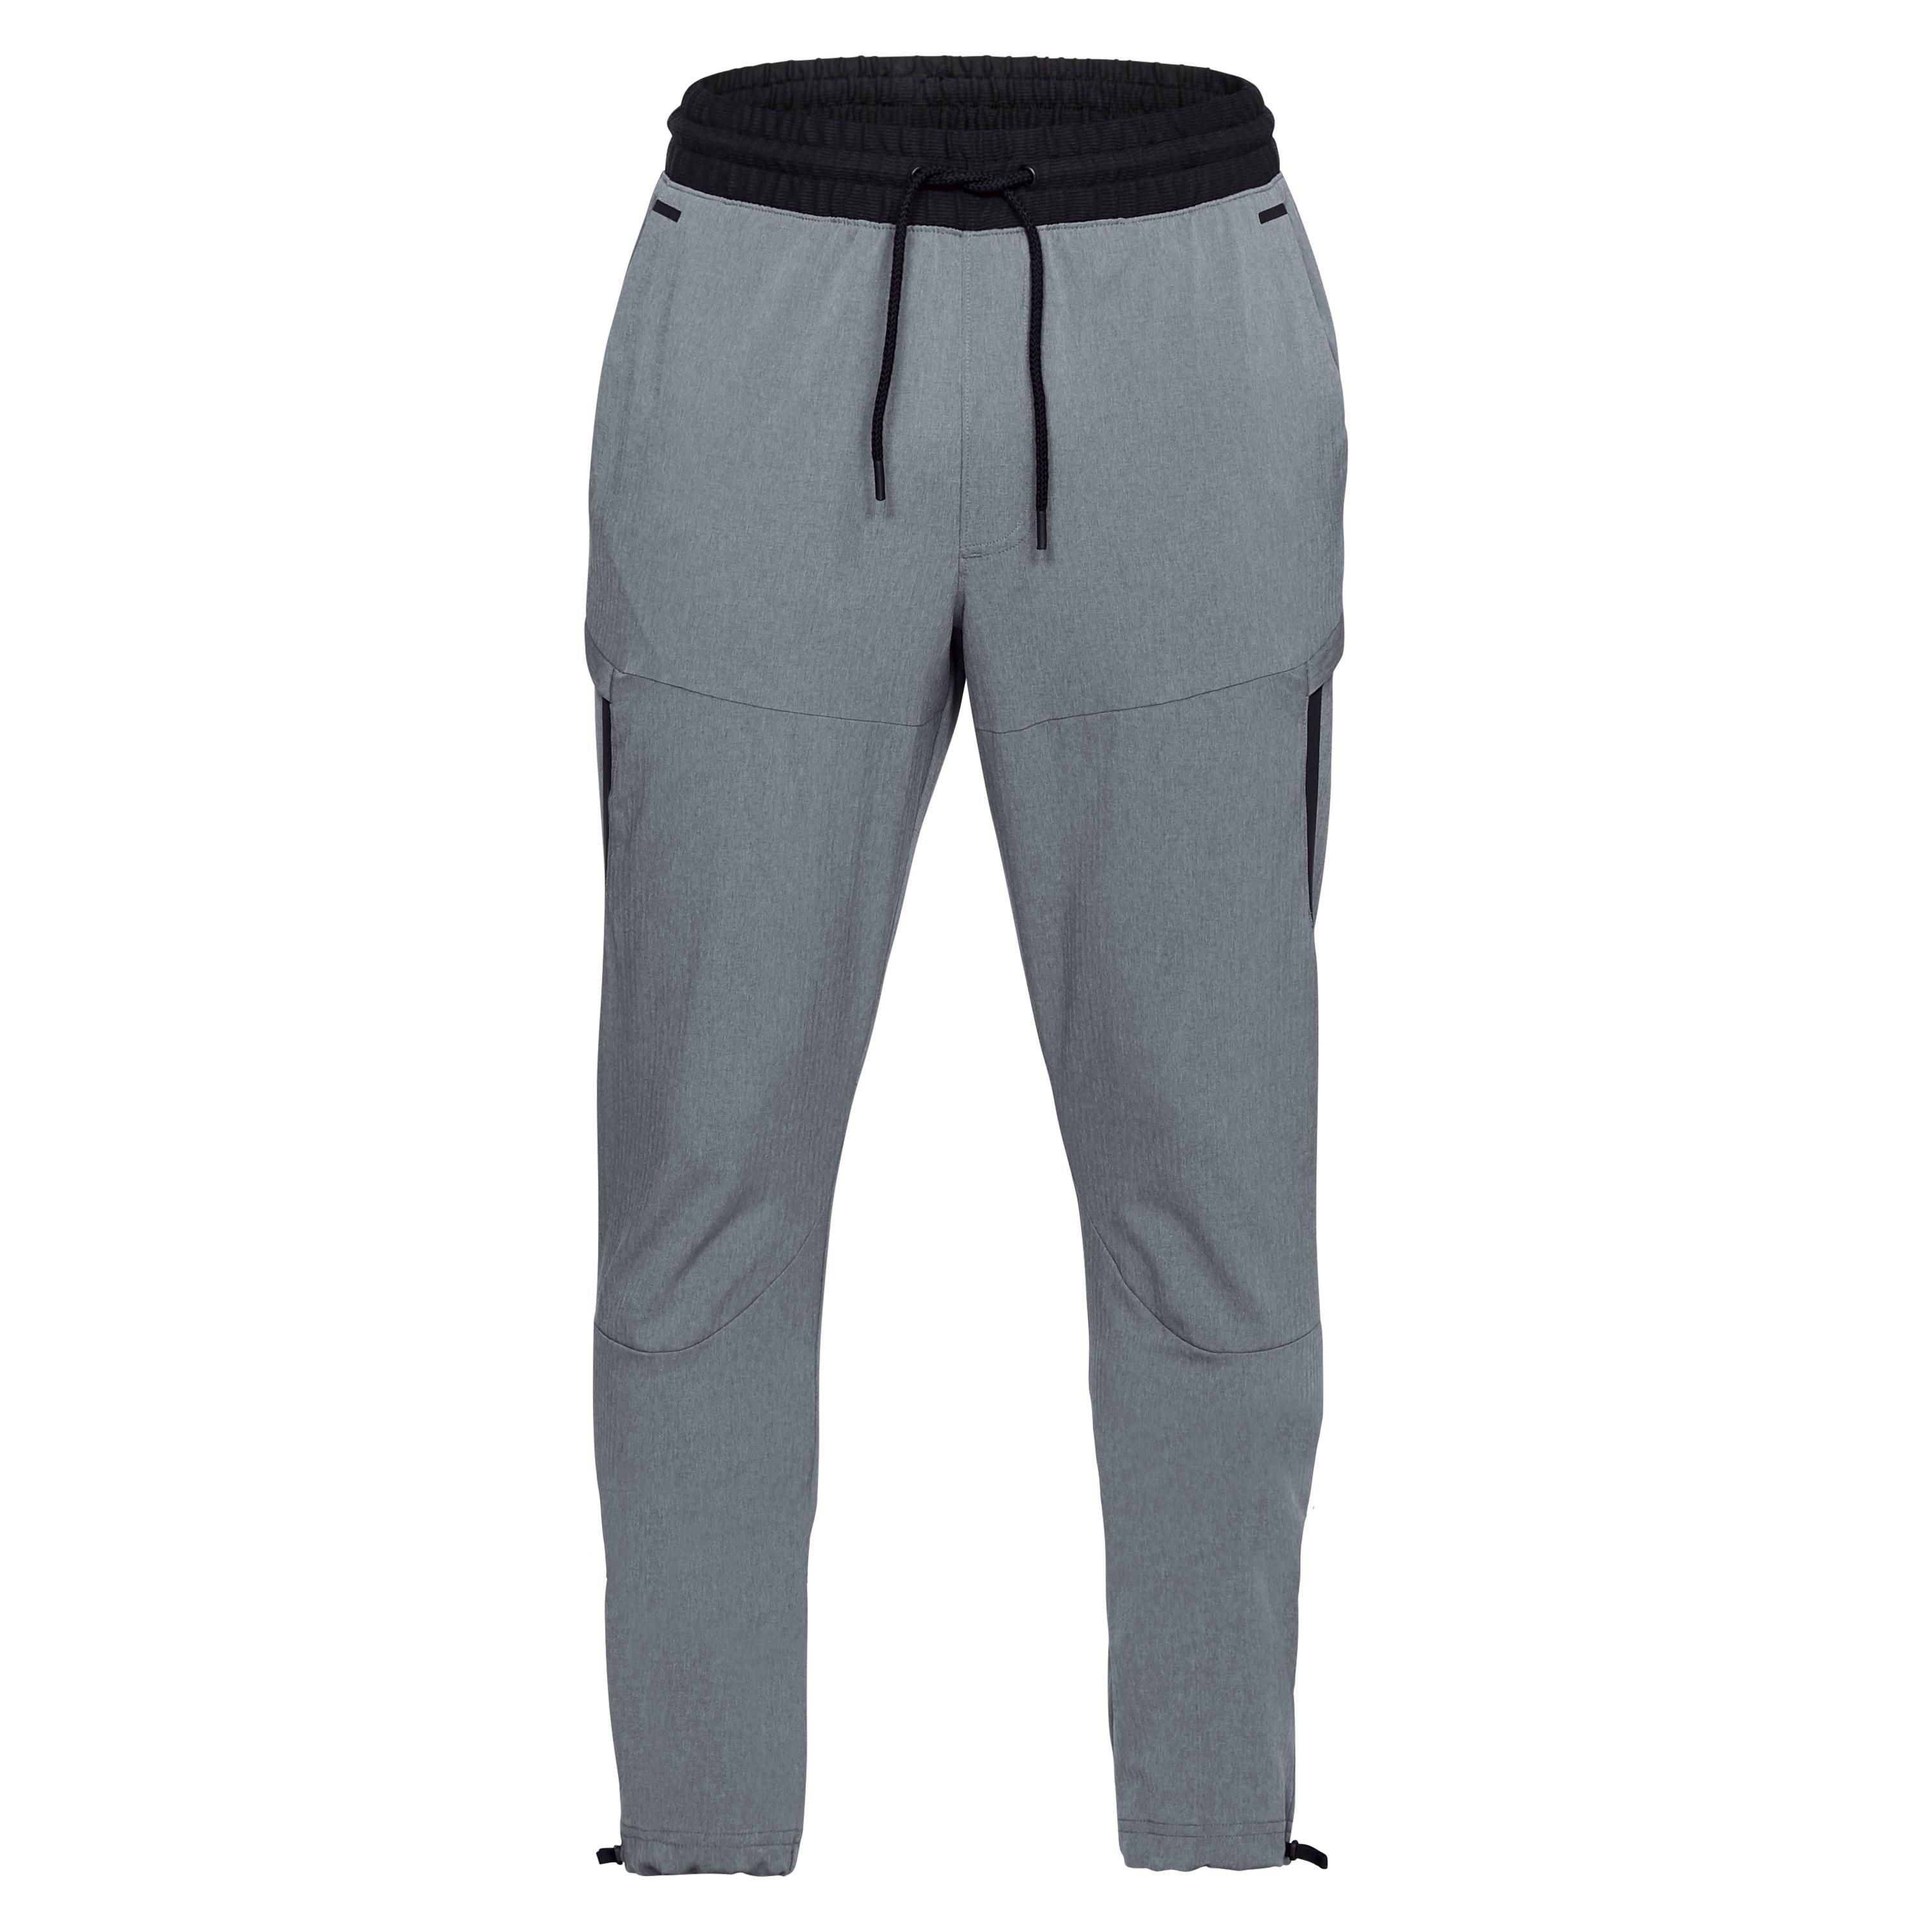 Under Armour Men's Ua Unstoppable Woven Cargo Pants in Gray for Men - Lyst